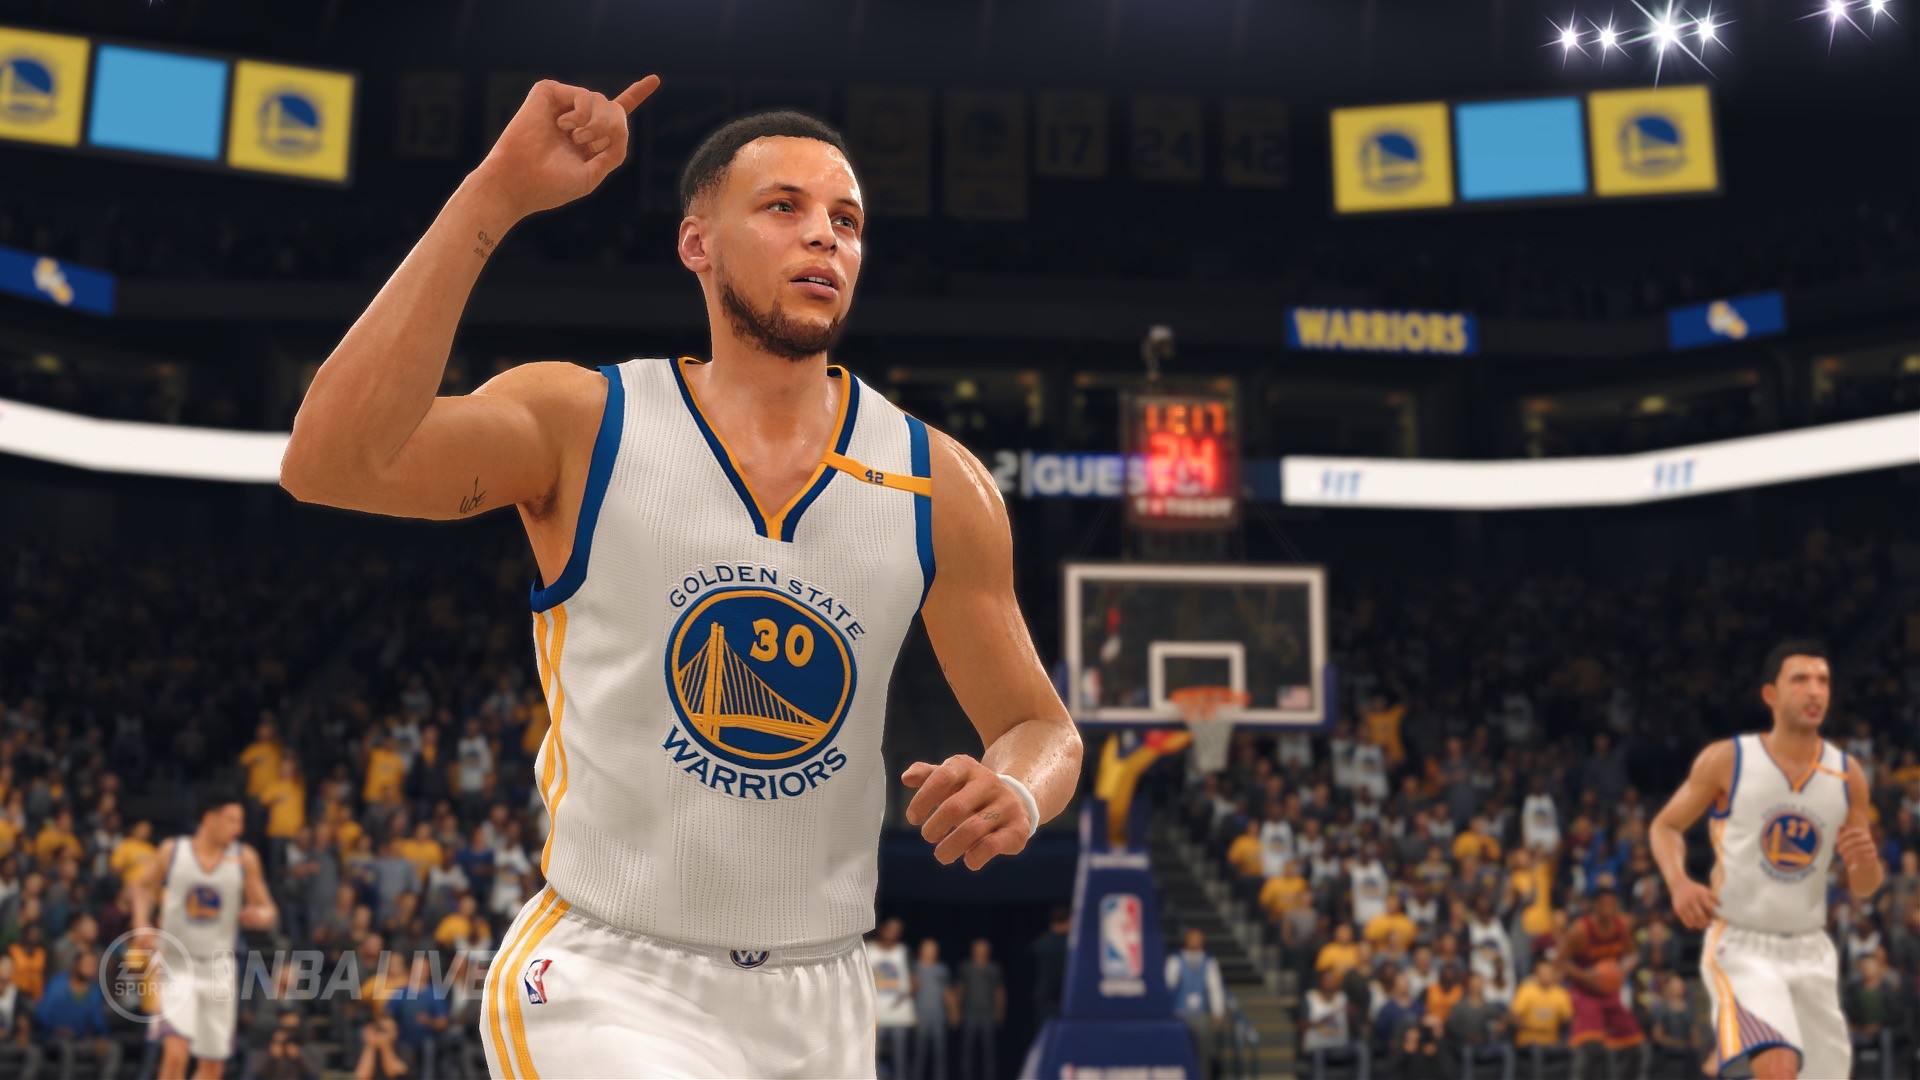 1920x1080 Steph Curry in NBA Live 18